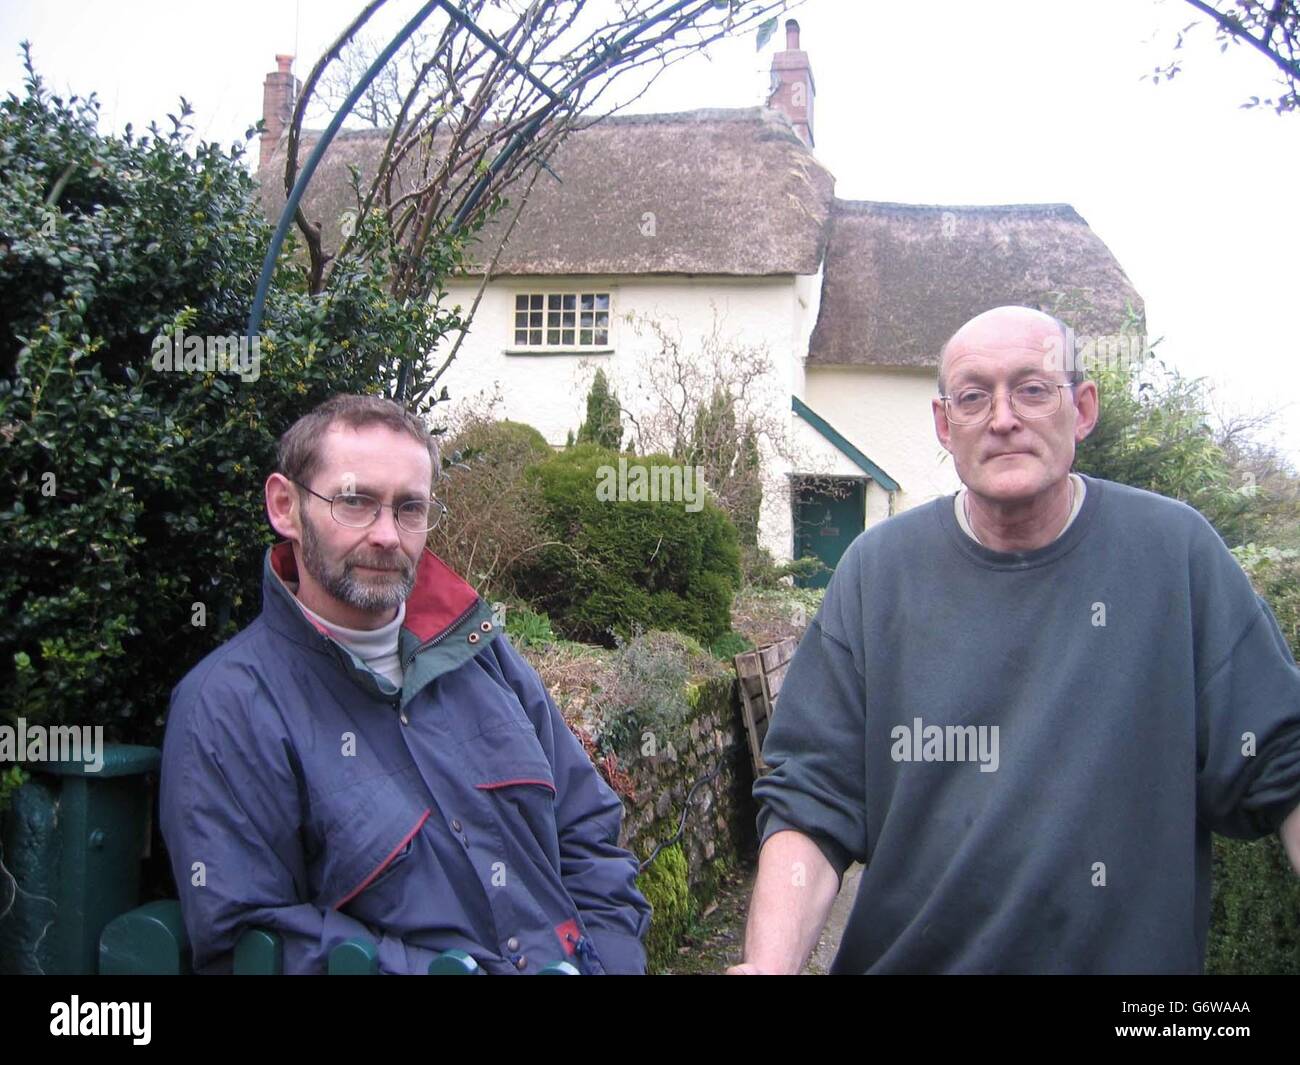 Roy Abbott, 51, (right) parish councillor Ken Hopkins, 55, in front of Riverside Cottage in Gittisham, East Devon, one of the properties to be sold and Mr Hopkins' home for the past 14 years. A vicar was to say prayers for parishioners whose picturesque rented homes are being sold by their landlord. Sixty adults and youngsters living in homes in the village Gittisham, East Devon, have been given up to three months notice by the Combe Estate, owned by Canadian-born Richard Marker. Reverend Richard Saunders was to pray for the villagers during the 11am service at Gittisham Church. Stock Photo